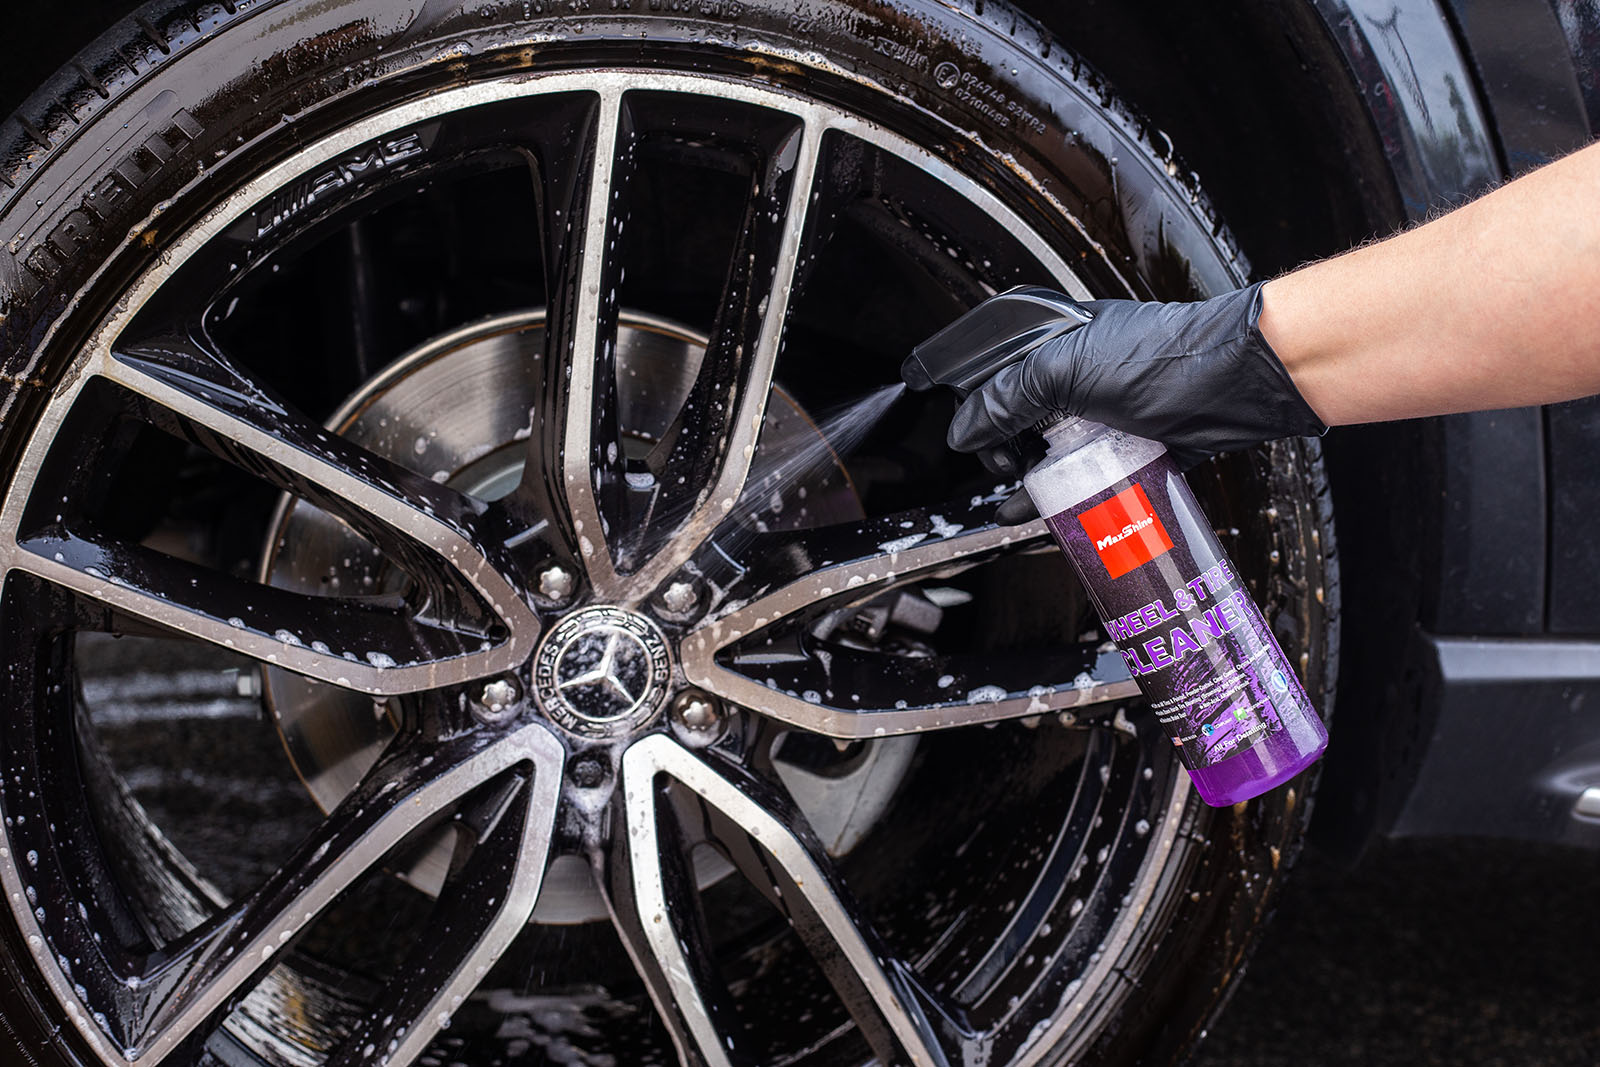 MaxShine Wheel and Tire Cleaner in rim